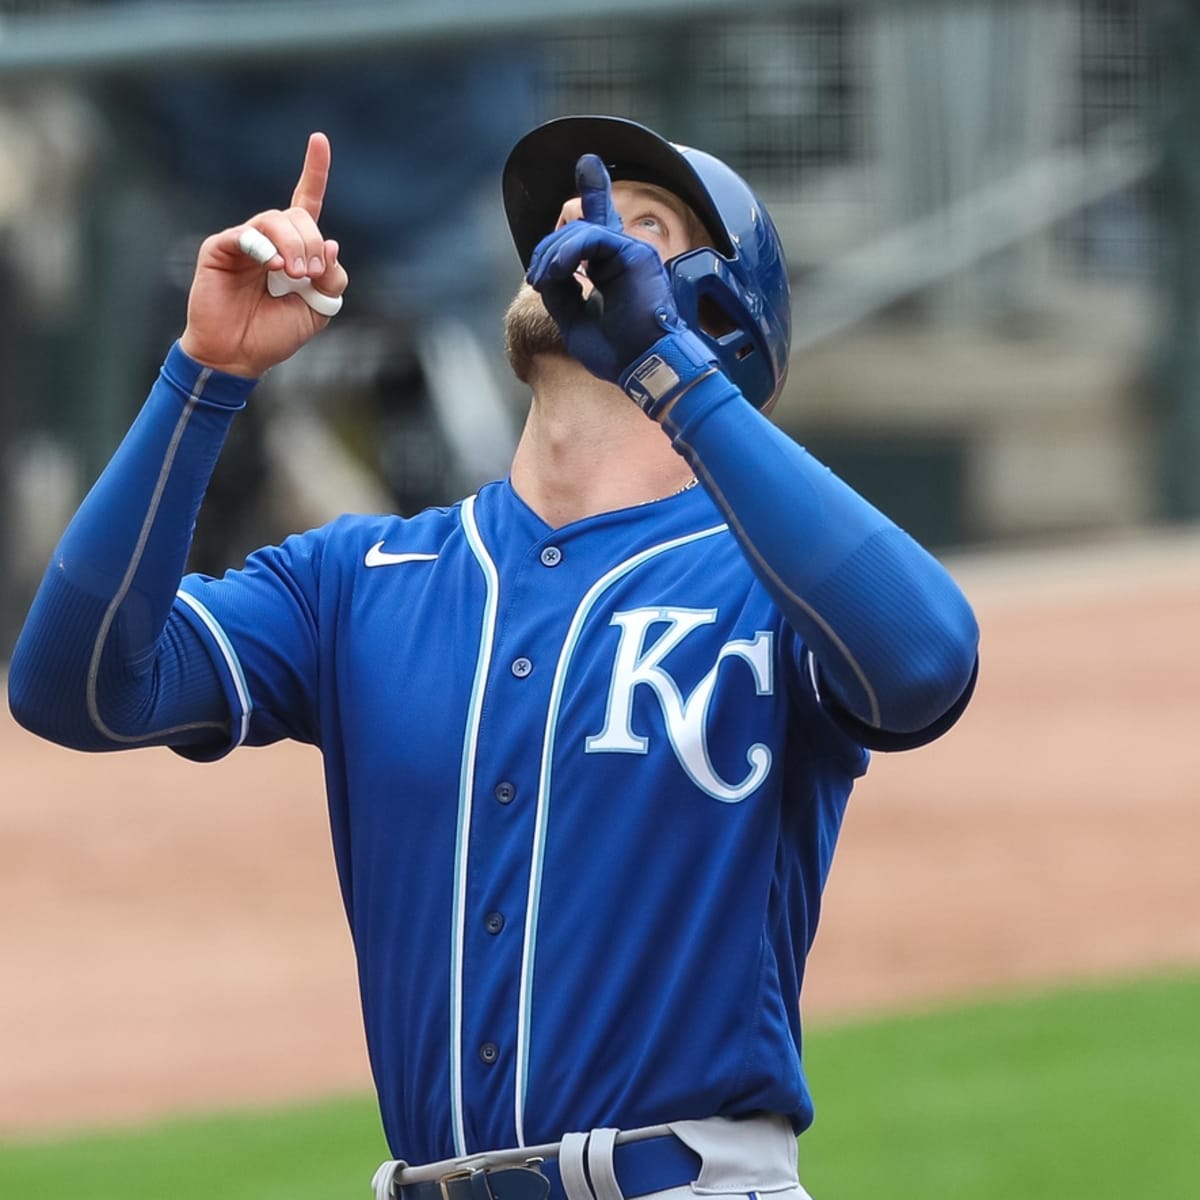 New Royals uniforms will be available on MLB The Show